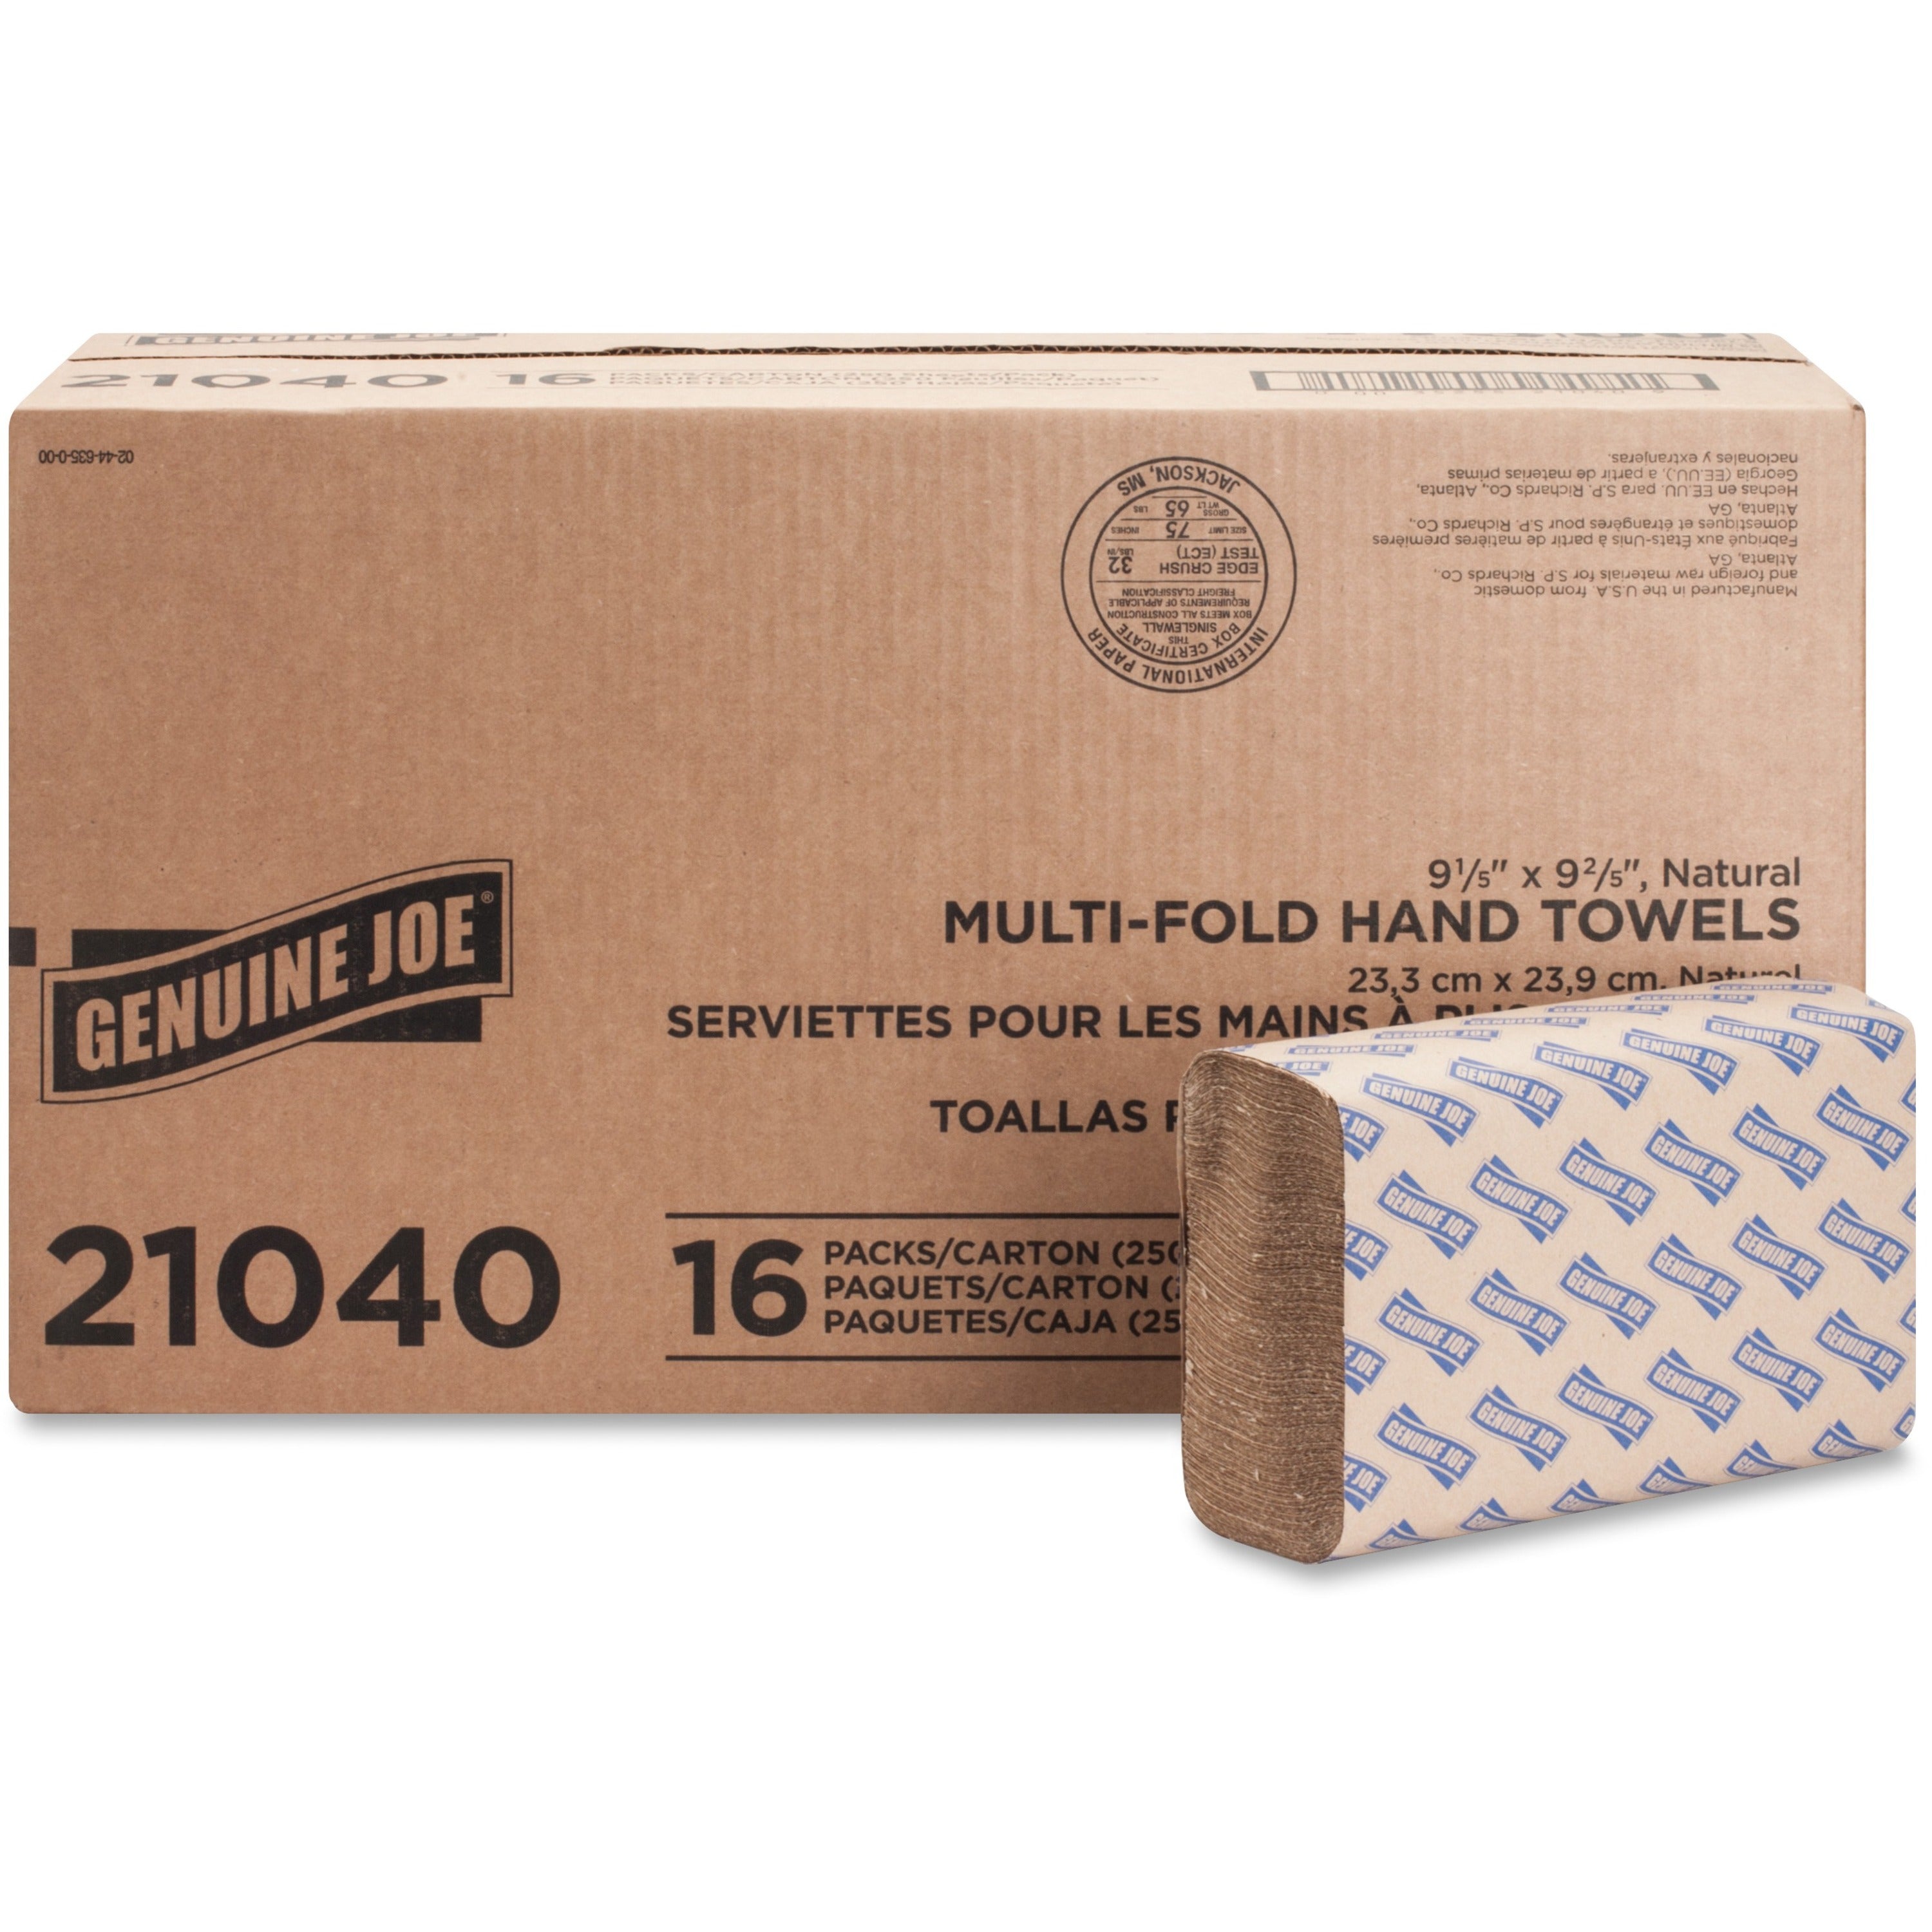 Genuine Joe Multifold Natural Towels - 1 Ply - Multifold - 9.25" x 9.40" - Natural - Paper - Chlorine-free, Interfolded, Embossed - For Restroom, Public Facilities, Commercial, Office, Breakroom, Kitchen - 250 Per Pack - 16 / Carton - 